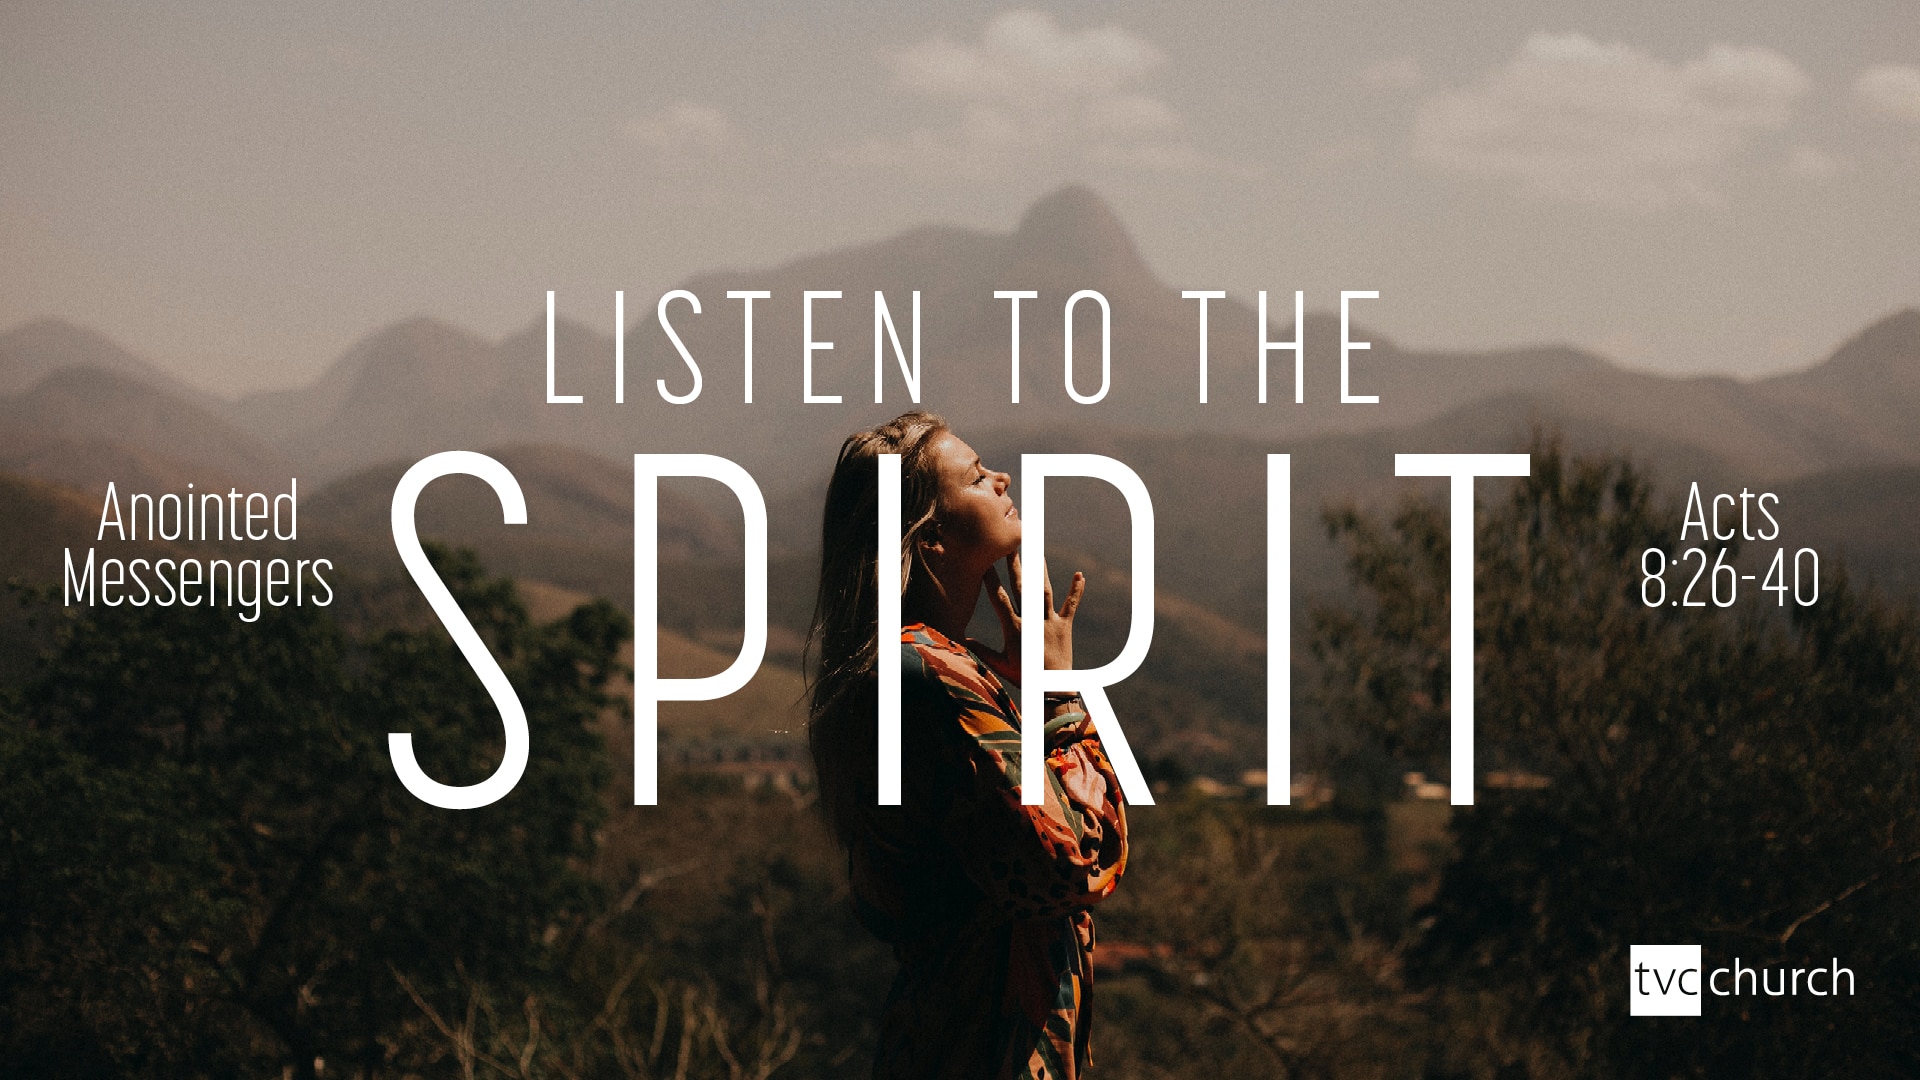 Anointed Messengers…listen to the Spirit